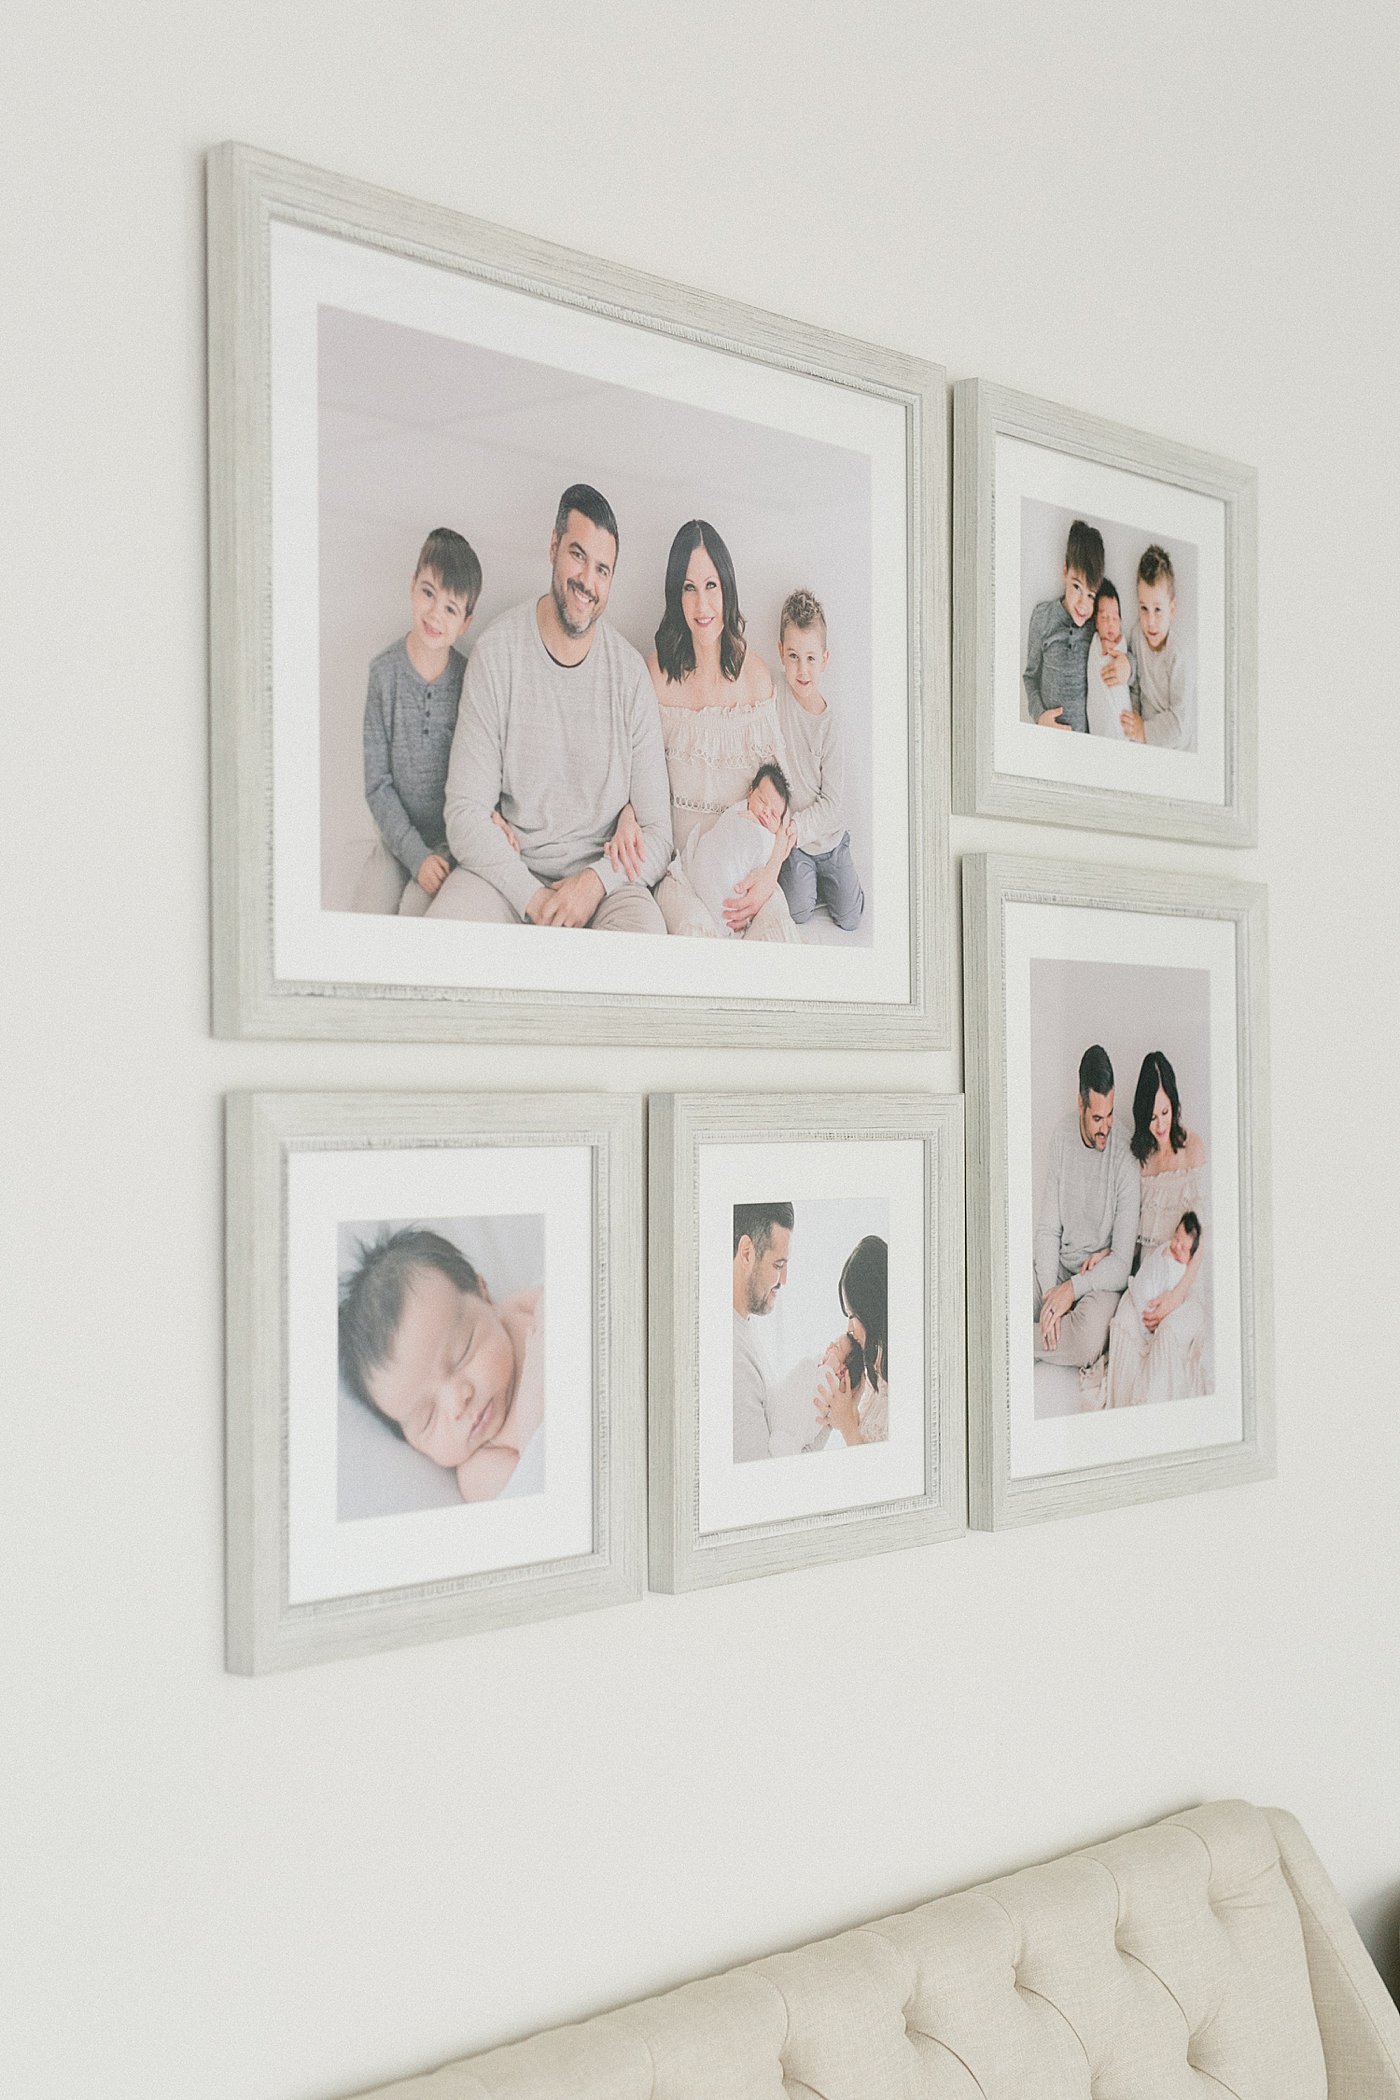 Displaying Family Artwork in Newport Beach with Ambre Williams Photography